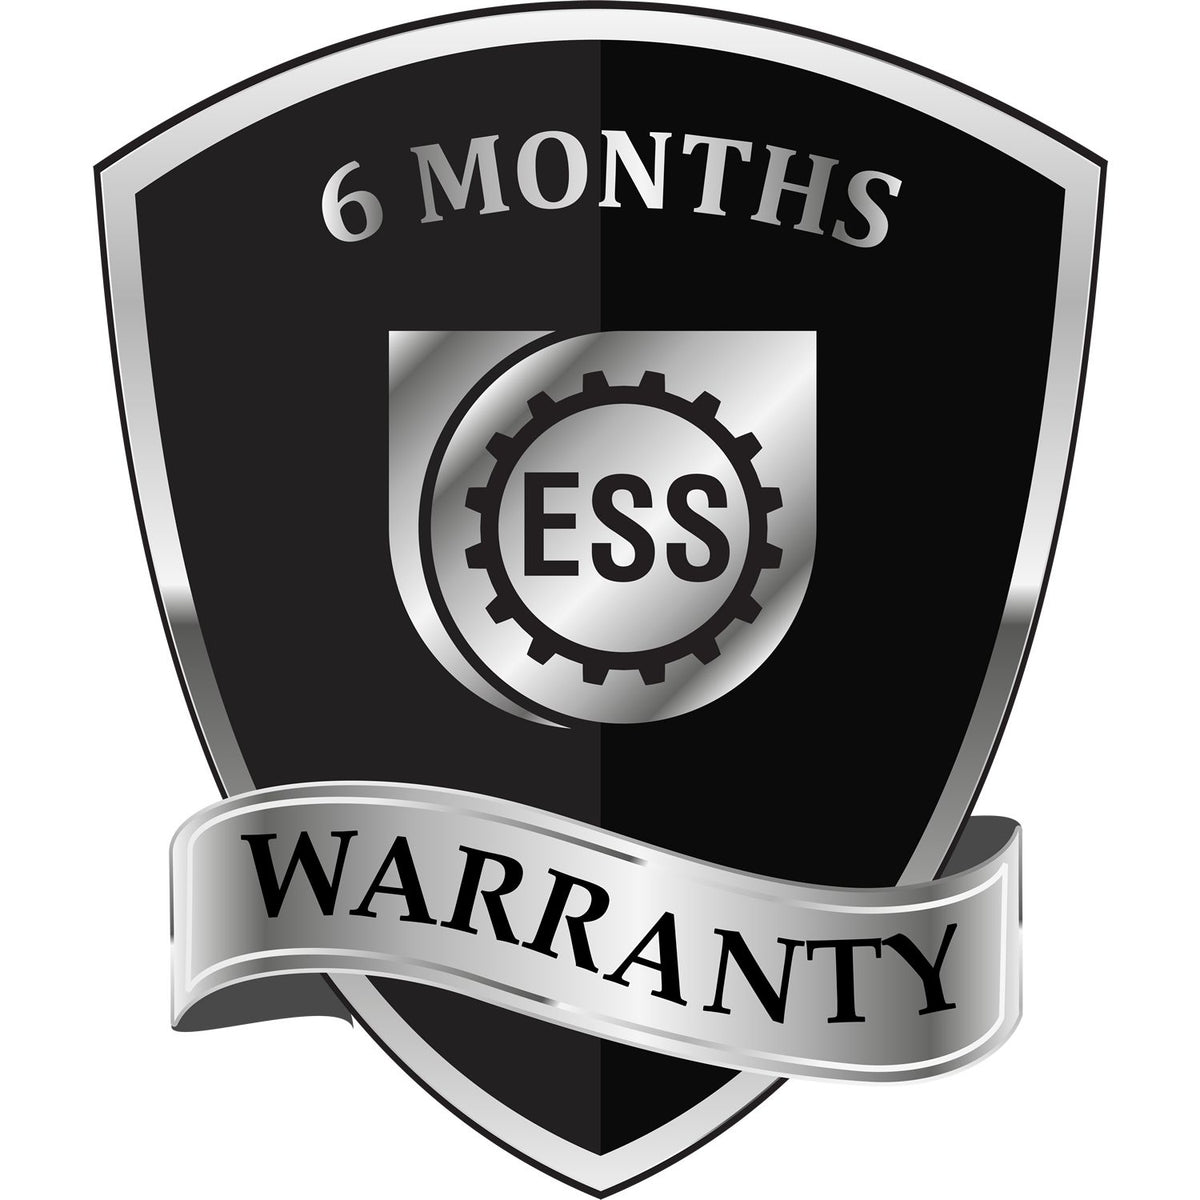 A badge or emblem showing a warranty icon for the Kansas Professional Engineer Seal Stamp